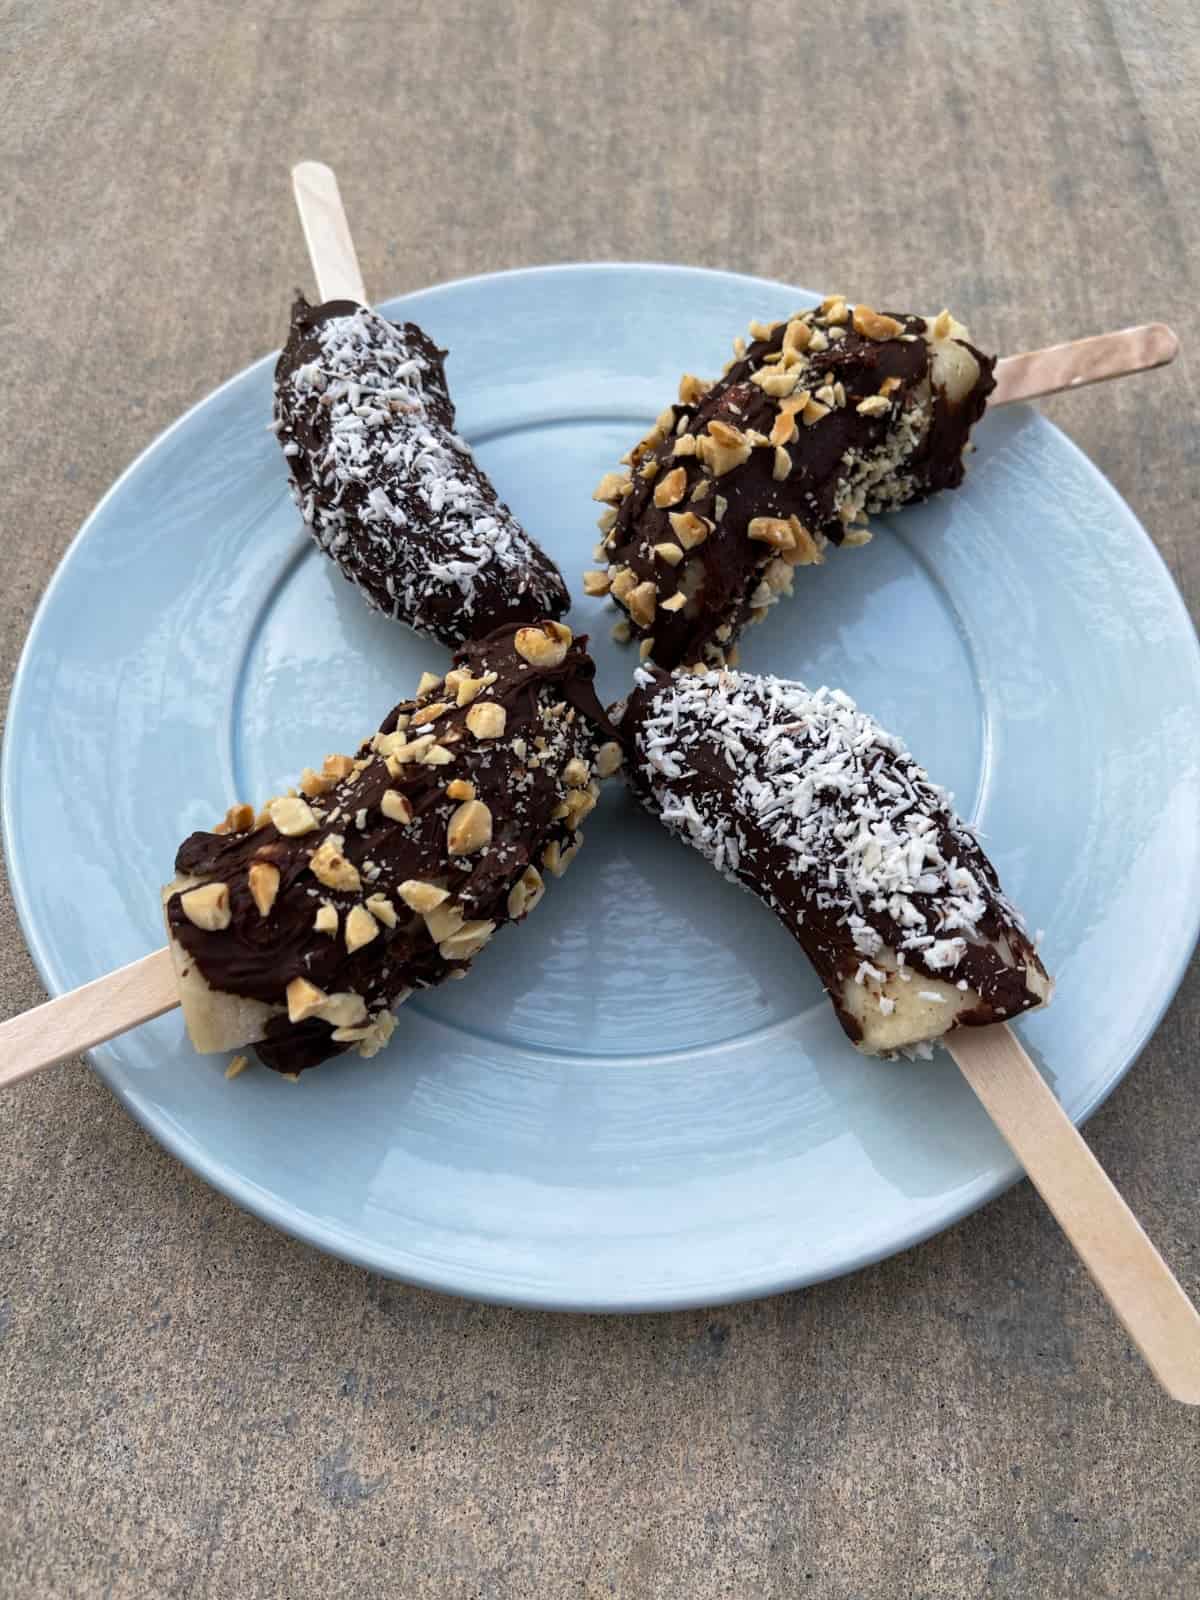 Four frozen chocolate bananas, two topped with shredded coconut and two with chopped peanuts, on a blue plate.